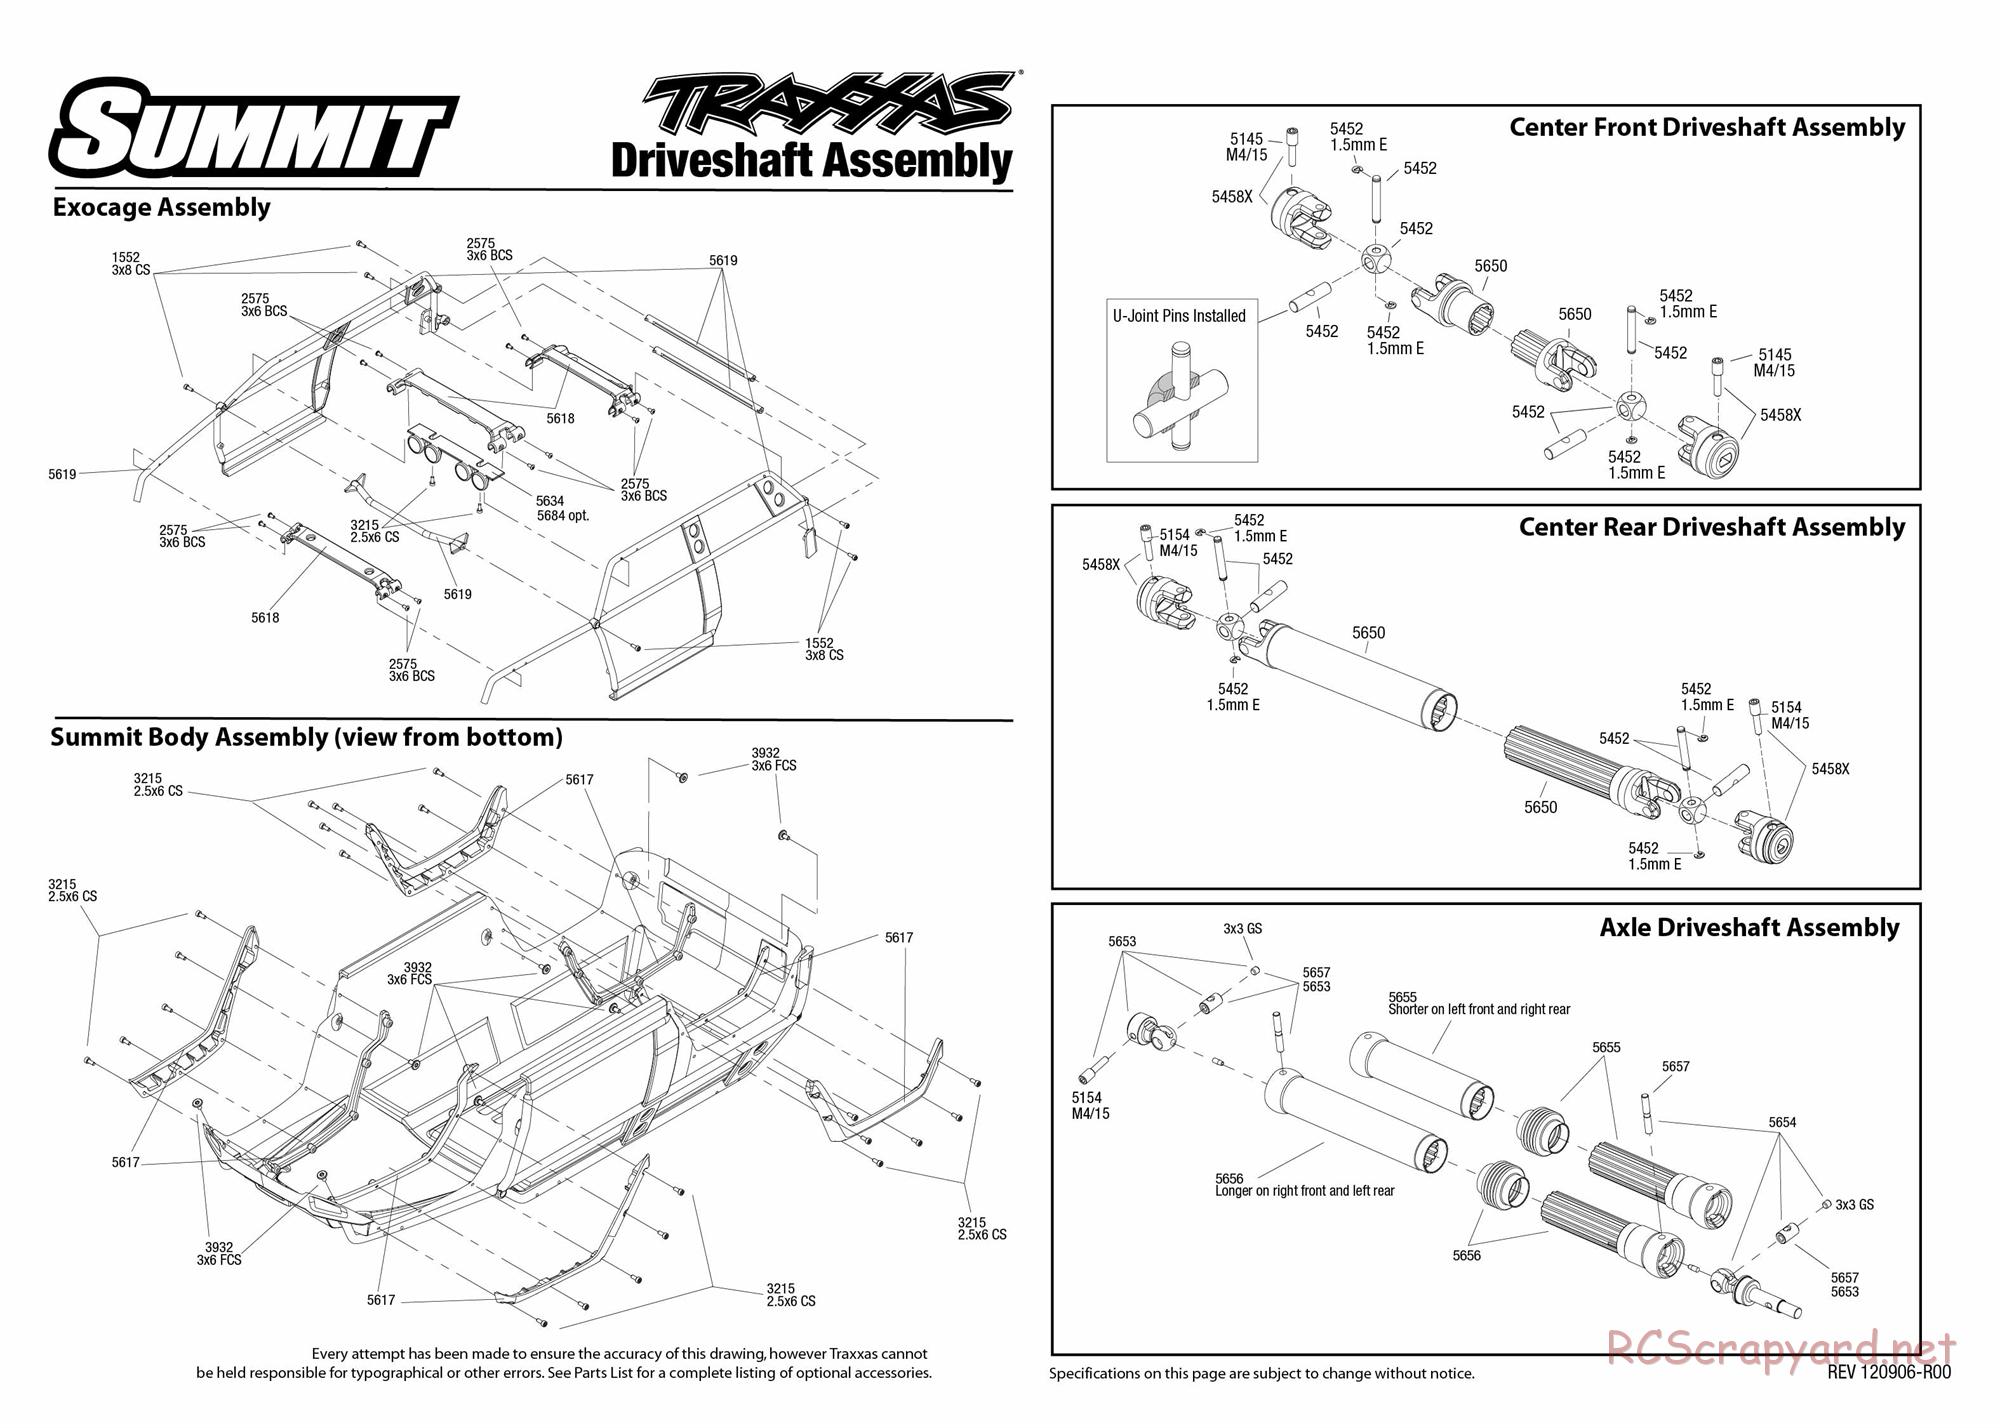 Traxxas - Summit LiPo (2012) - Exploded Views - Page 2